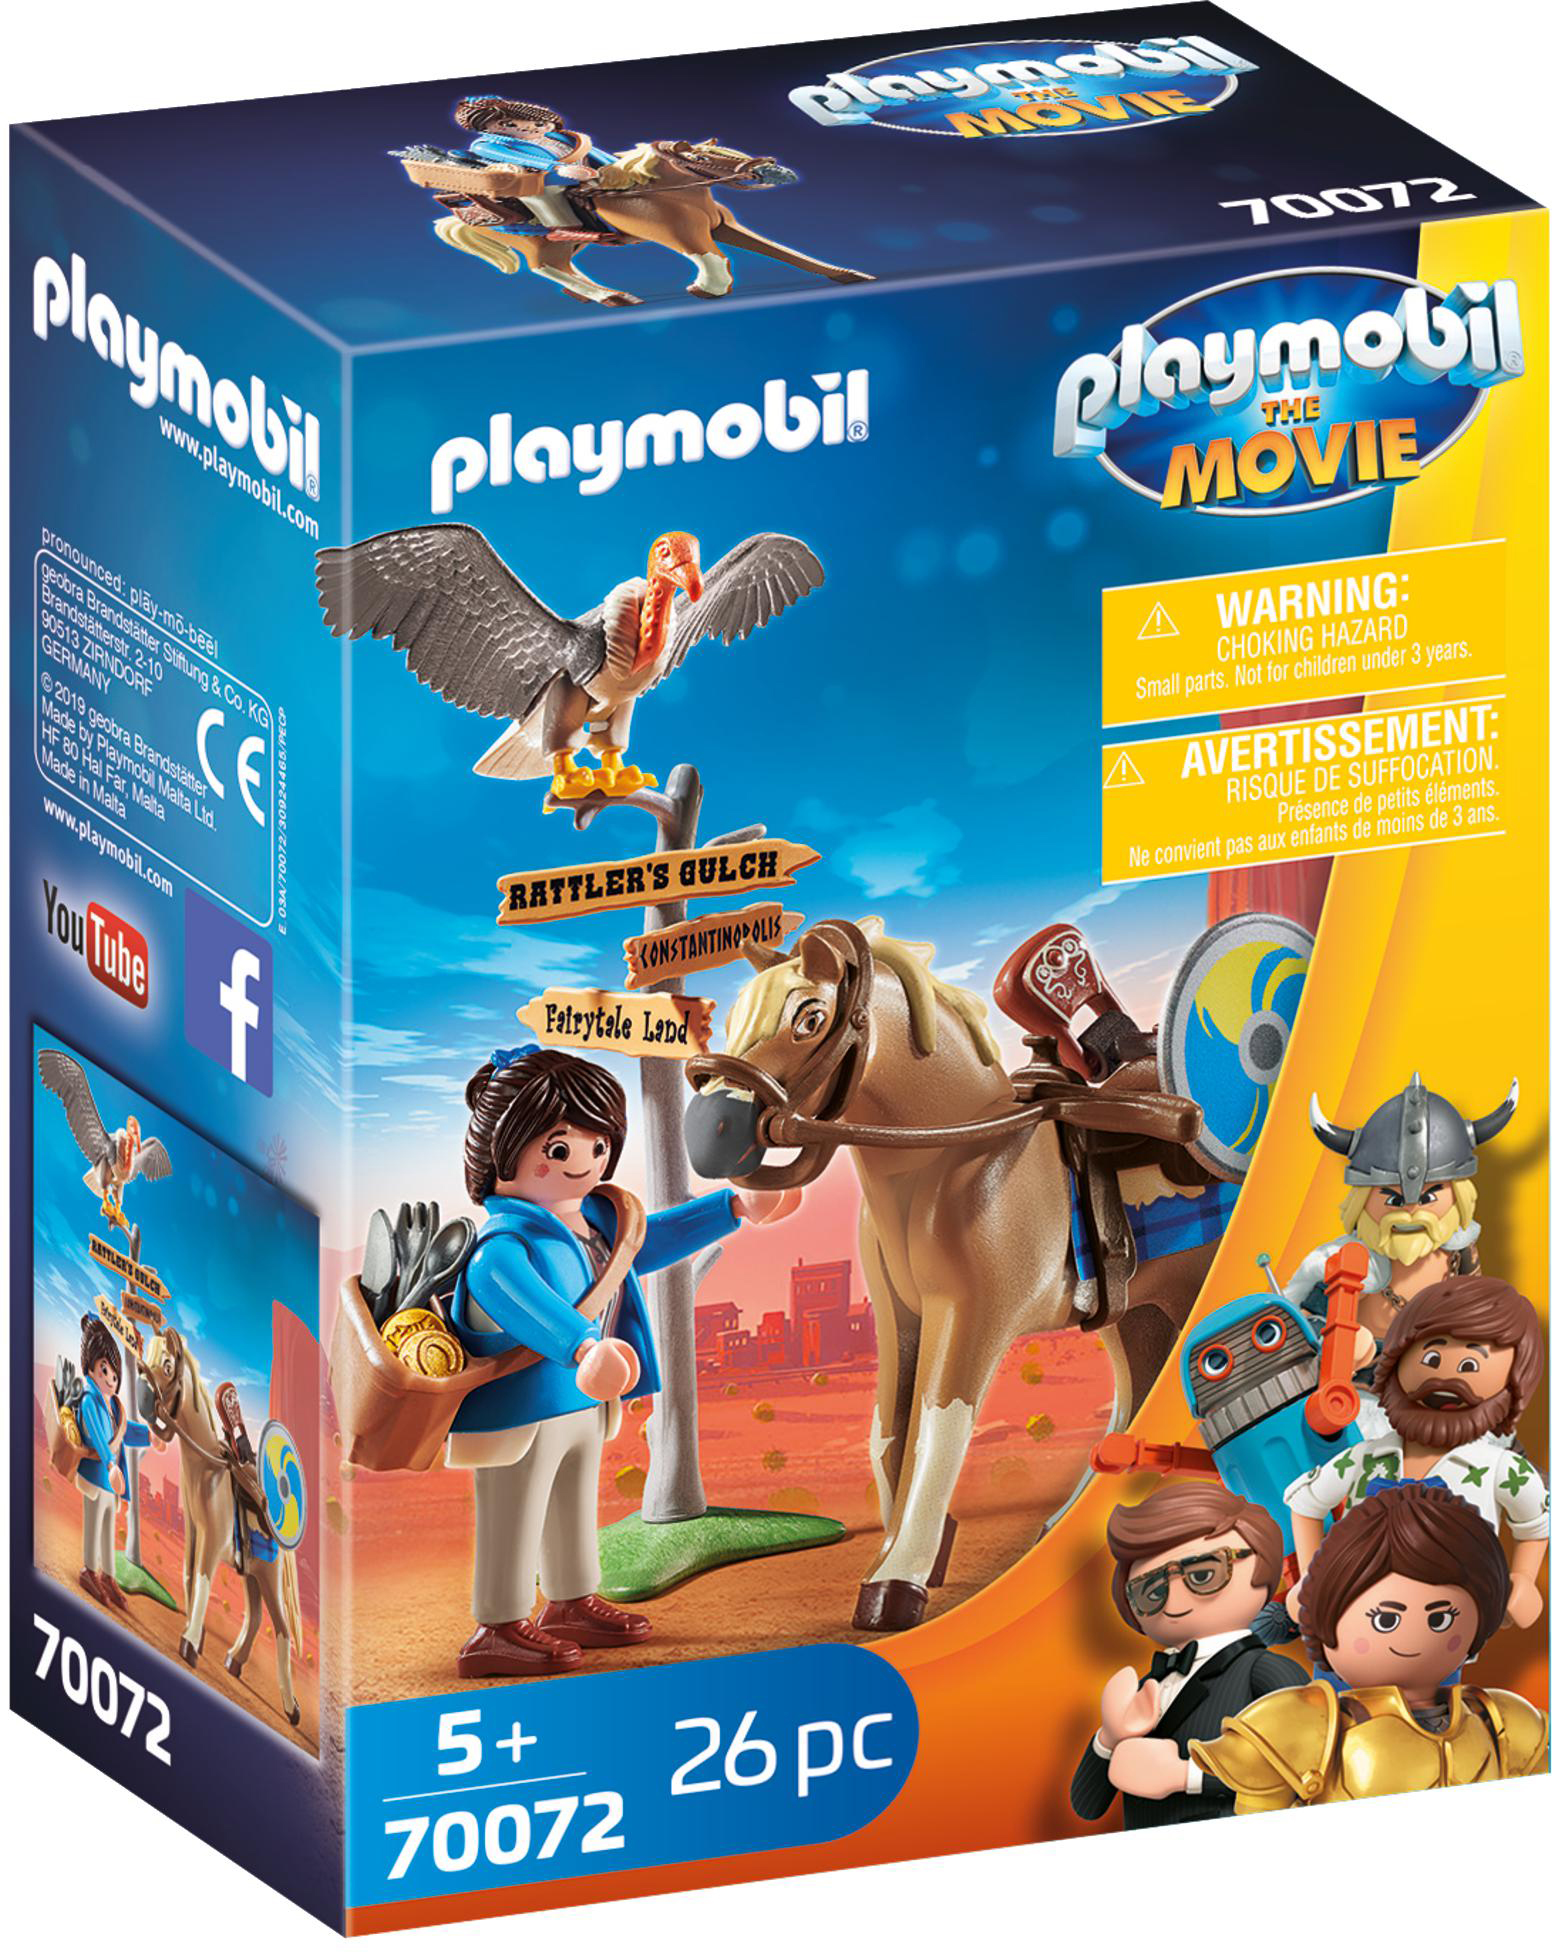 Playmobil The Movie Marla W Ith Horse - image 1 of 5